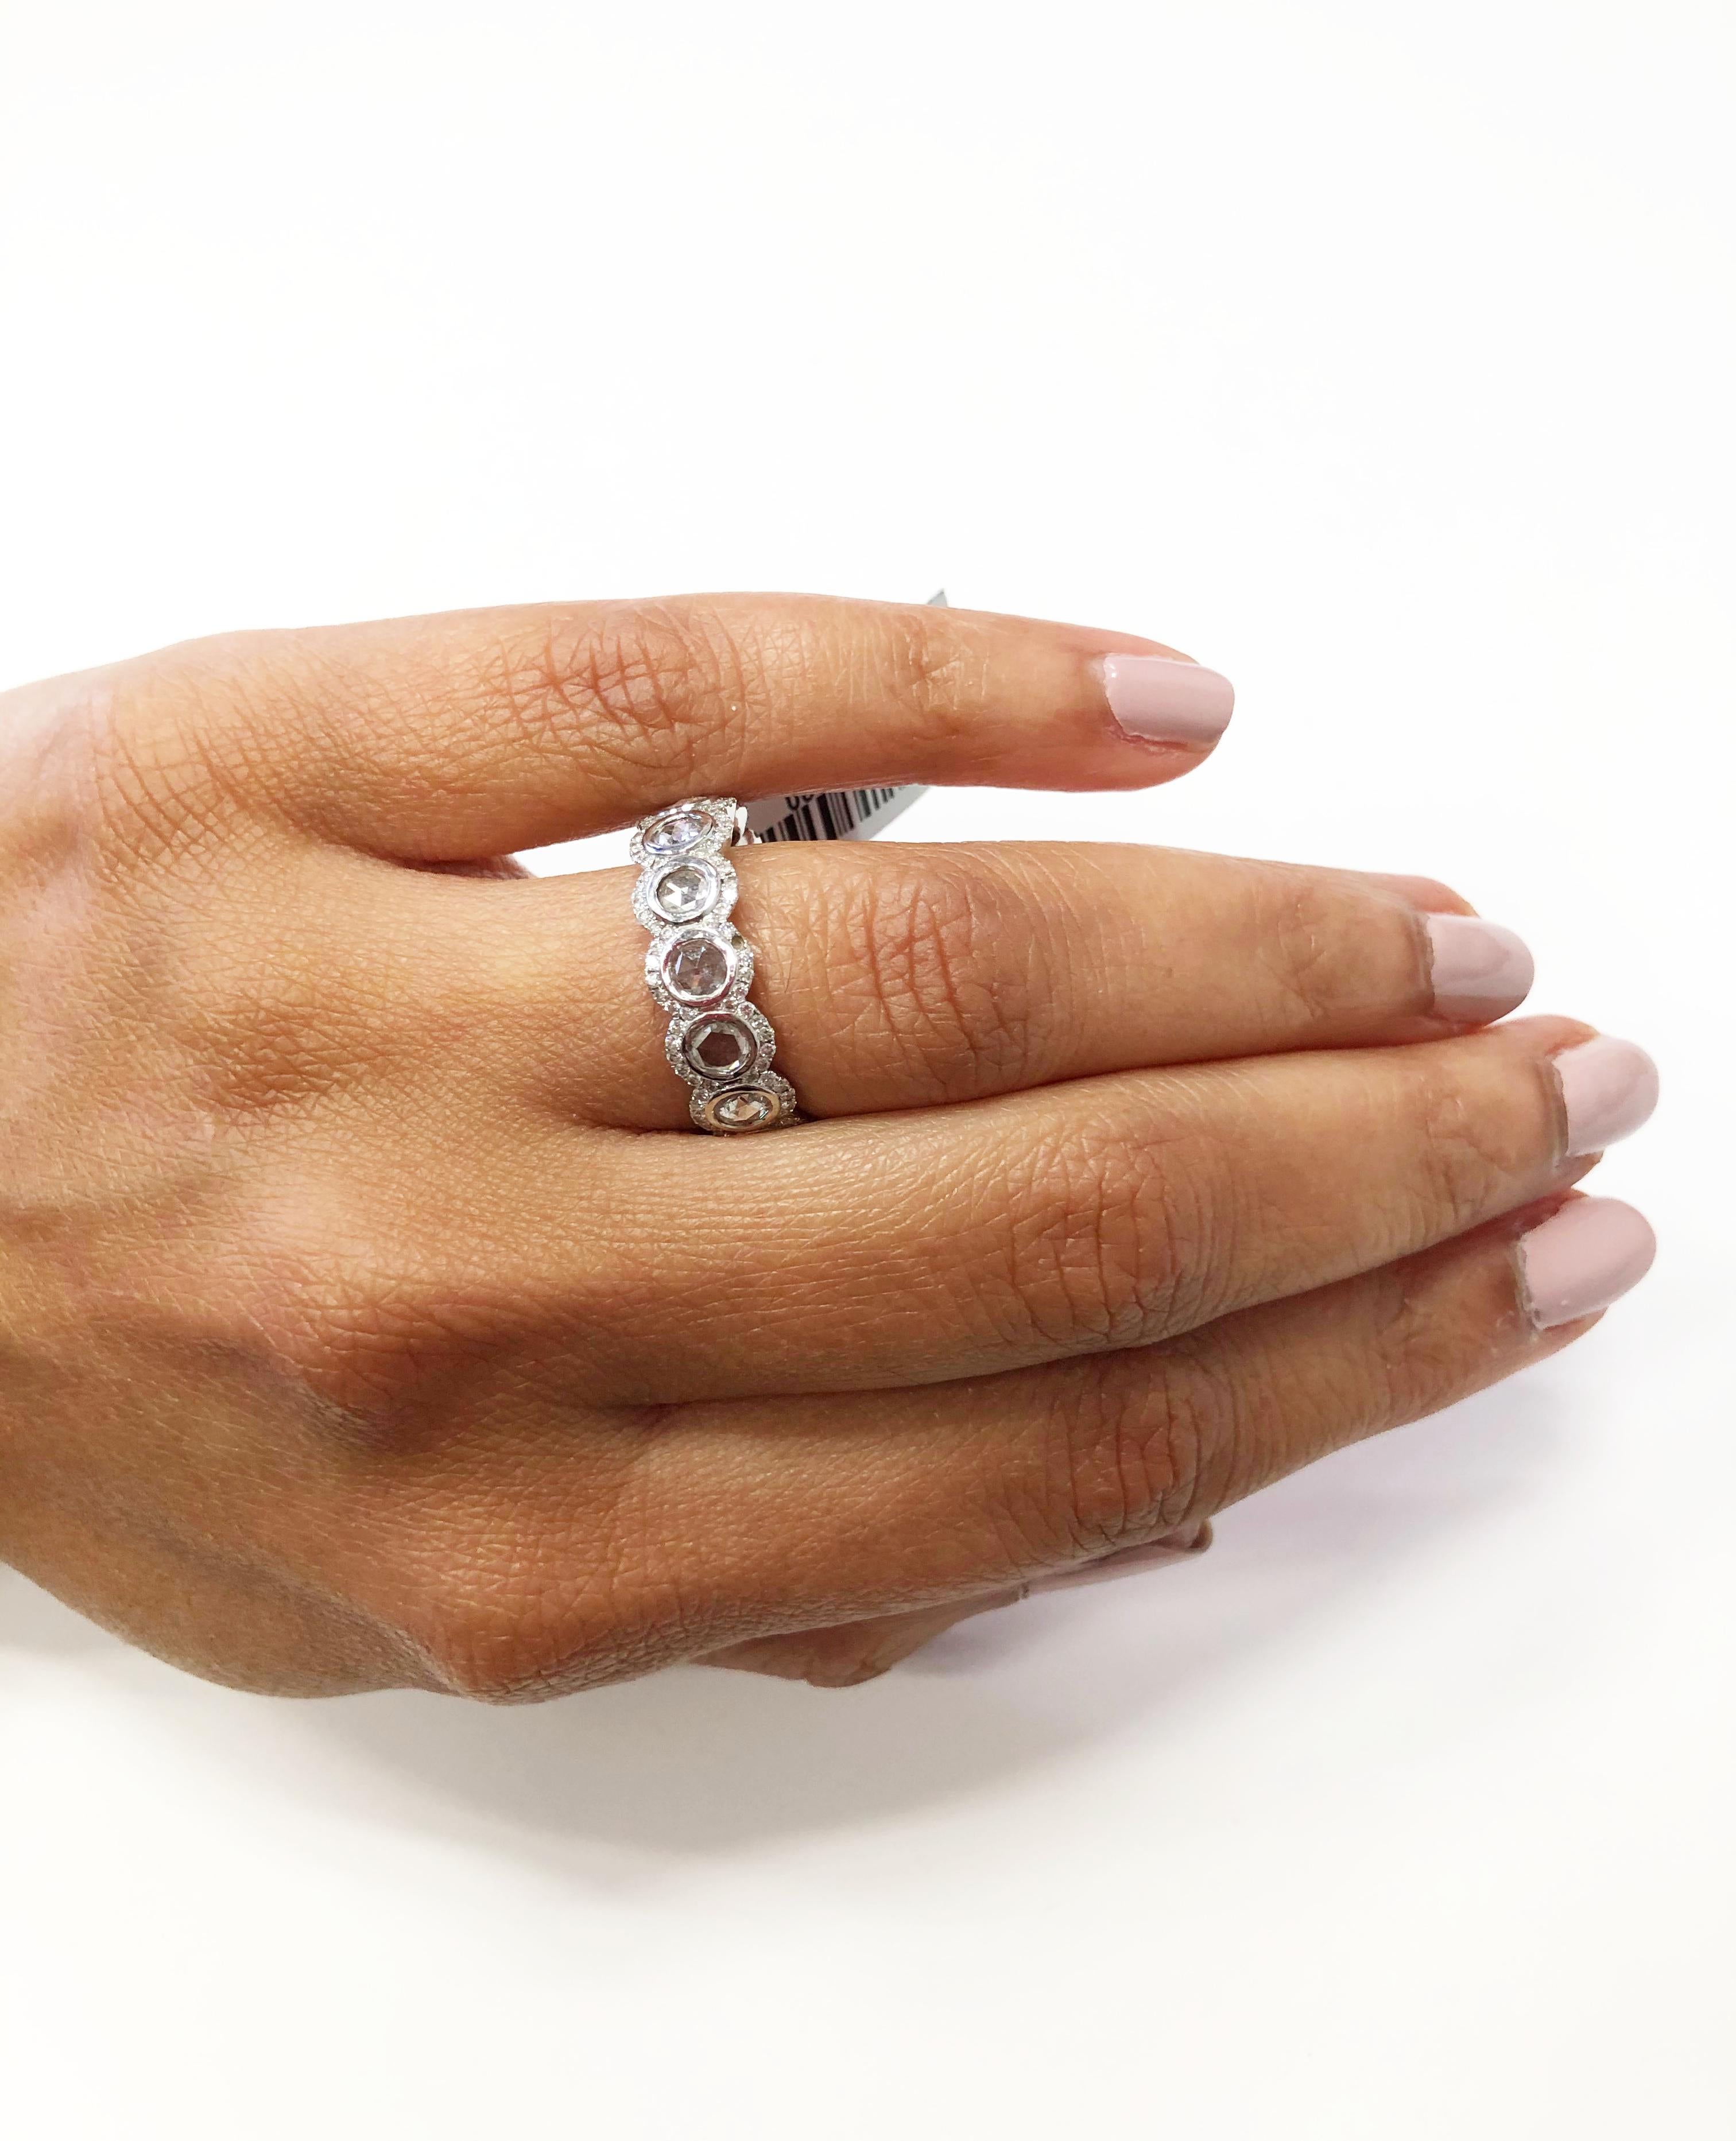 Gorgeous diamond rose cut band with 2.50 carats of white, eye clean diamonds in a handmade 18k white gold mounting.  This band is unique mixing rosecuts with faceted stones in a size 6 band.  Perfect for stacking or wearing on it's own!